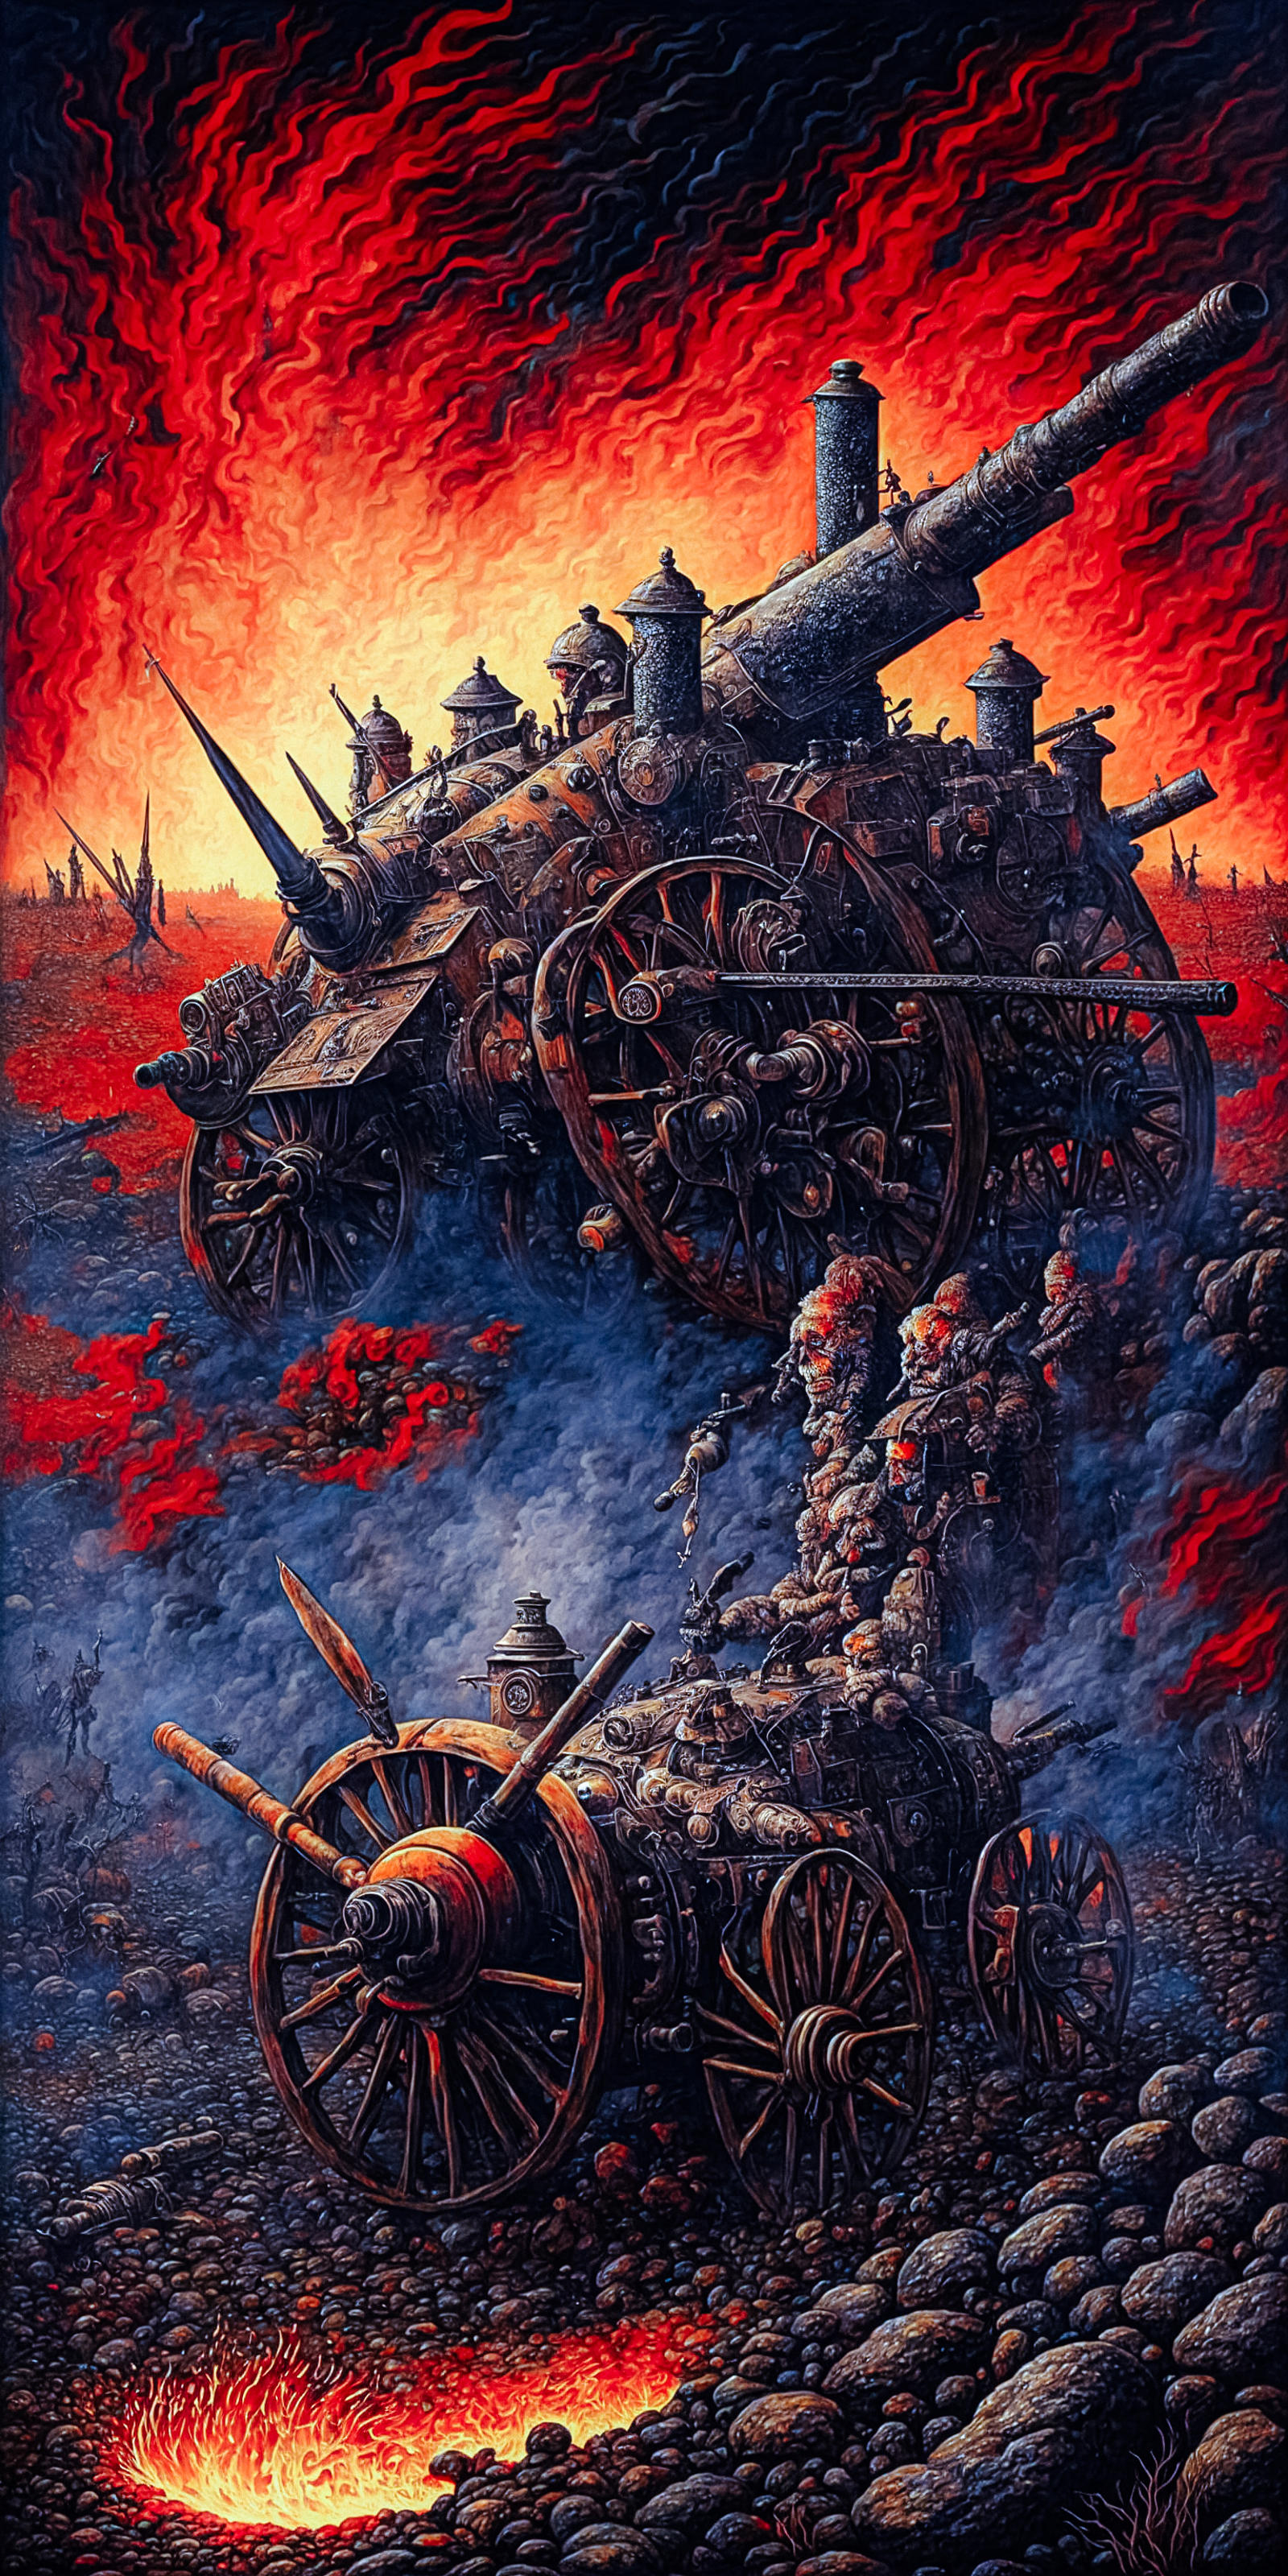 A painting of a large steampunk tank with people on it.